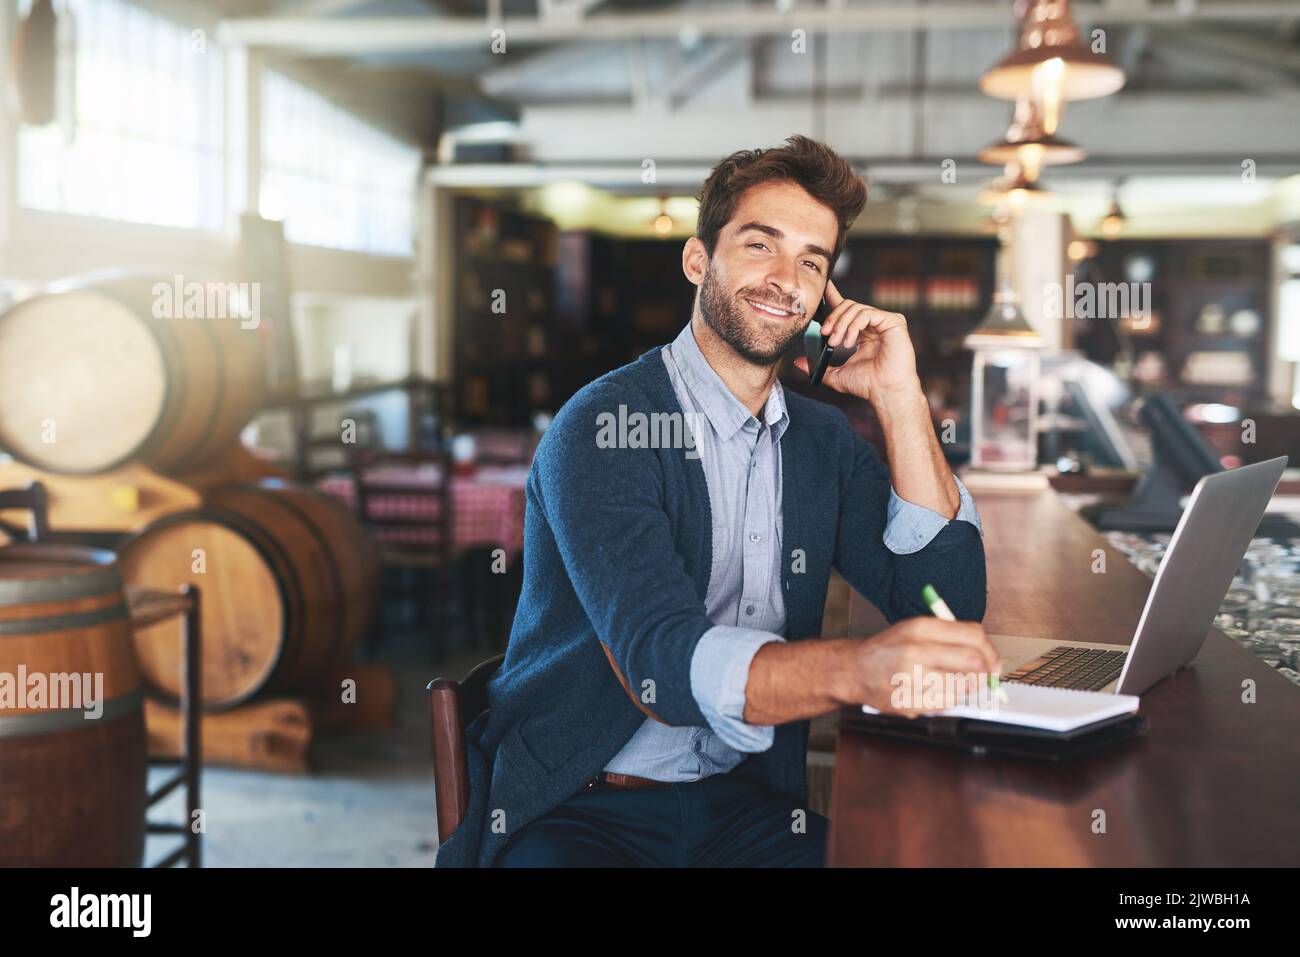 When would you like to meet. Cropped portrait of a handsome young man using his laptop and cellphone in a bar. Stock Photo